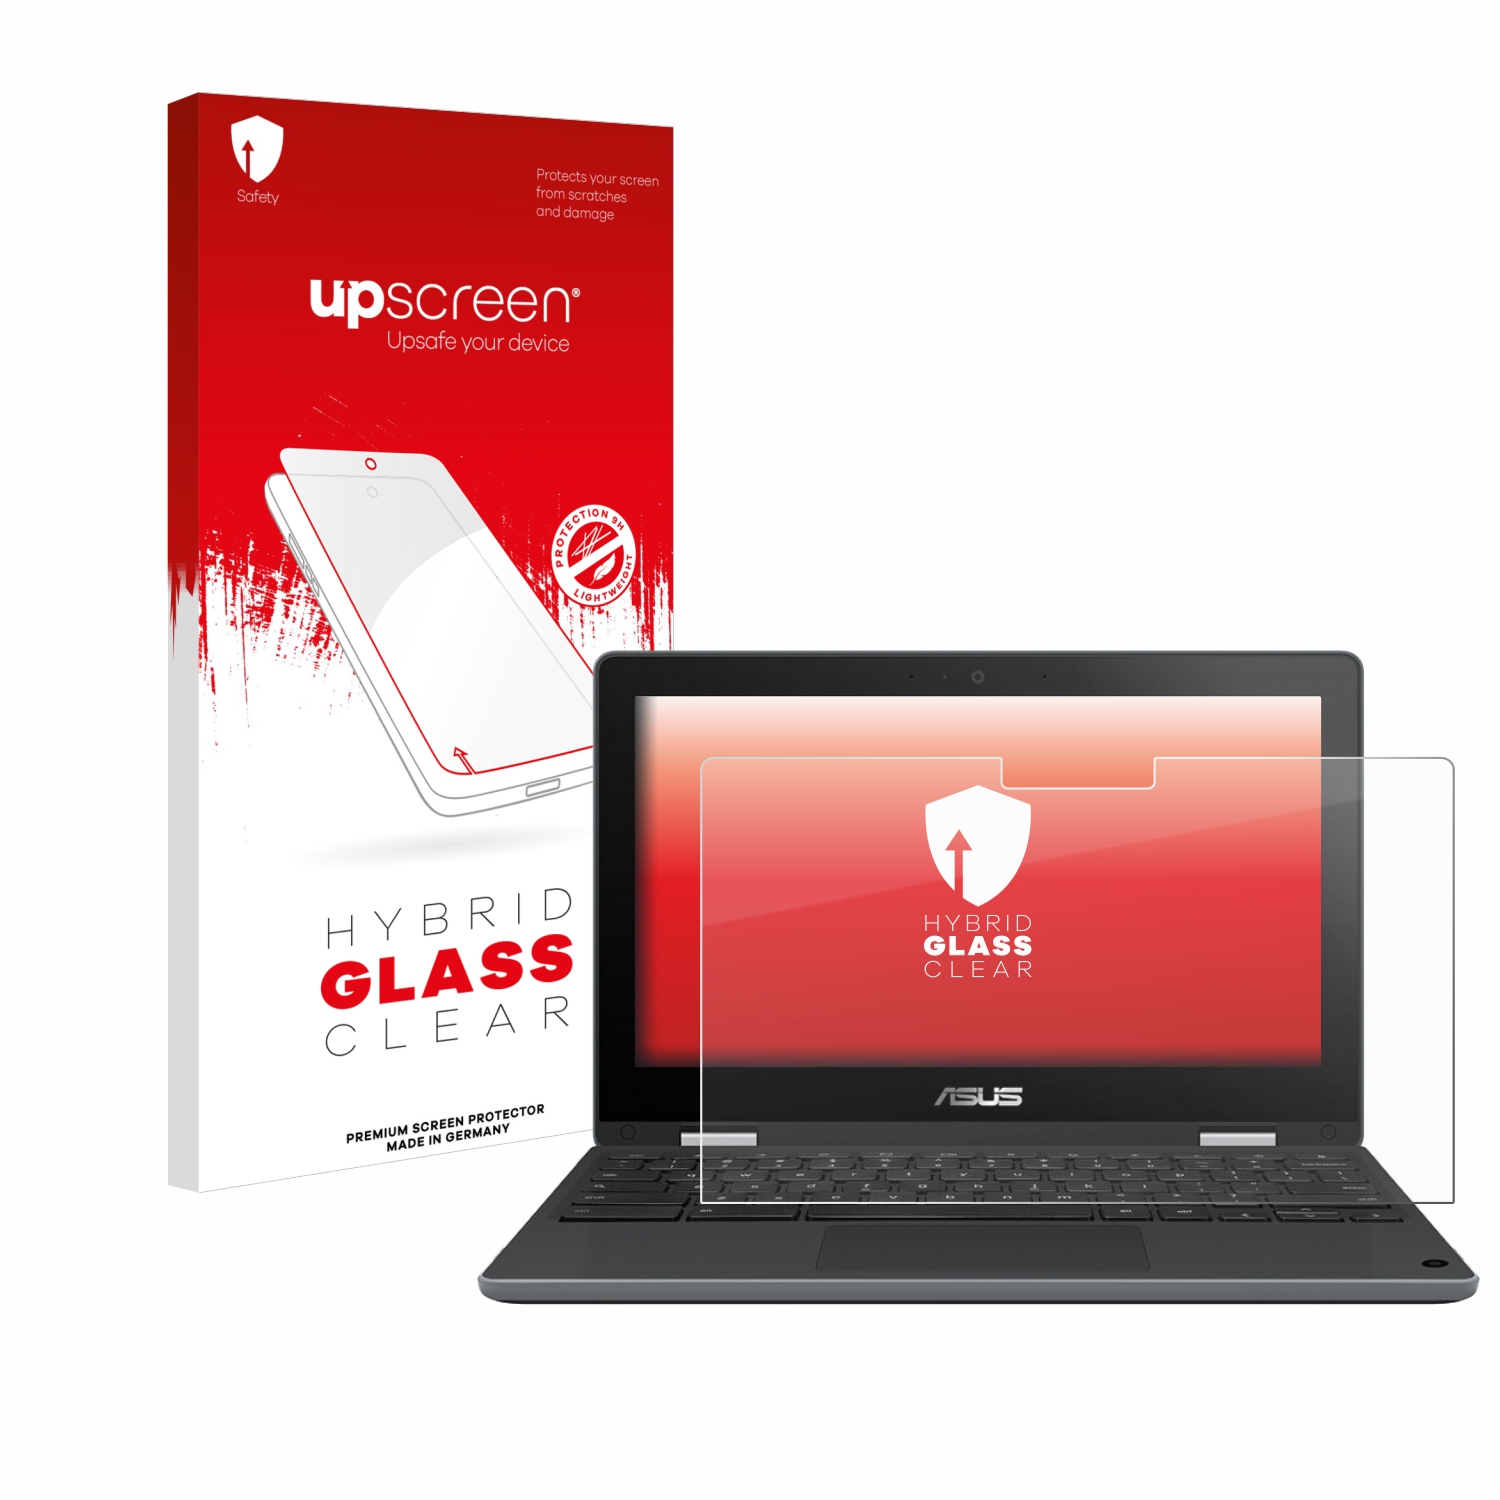 upscreen Hybrid Glass Clear Premium Glass Screen Protector for